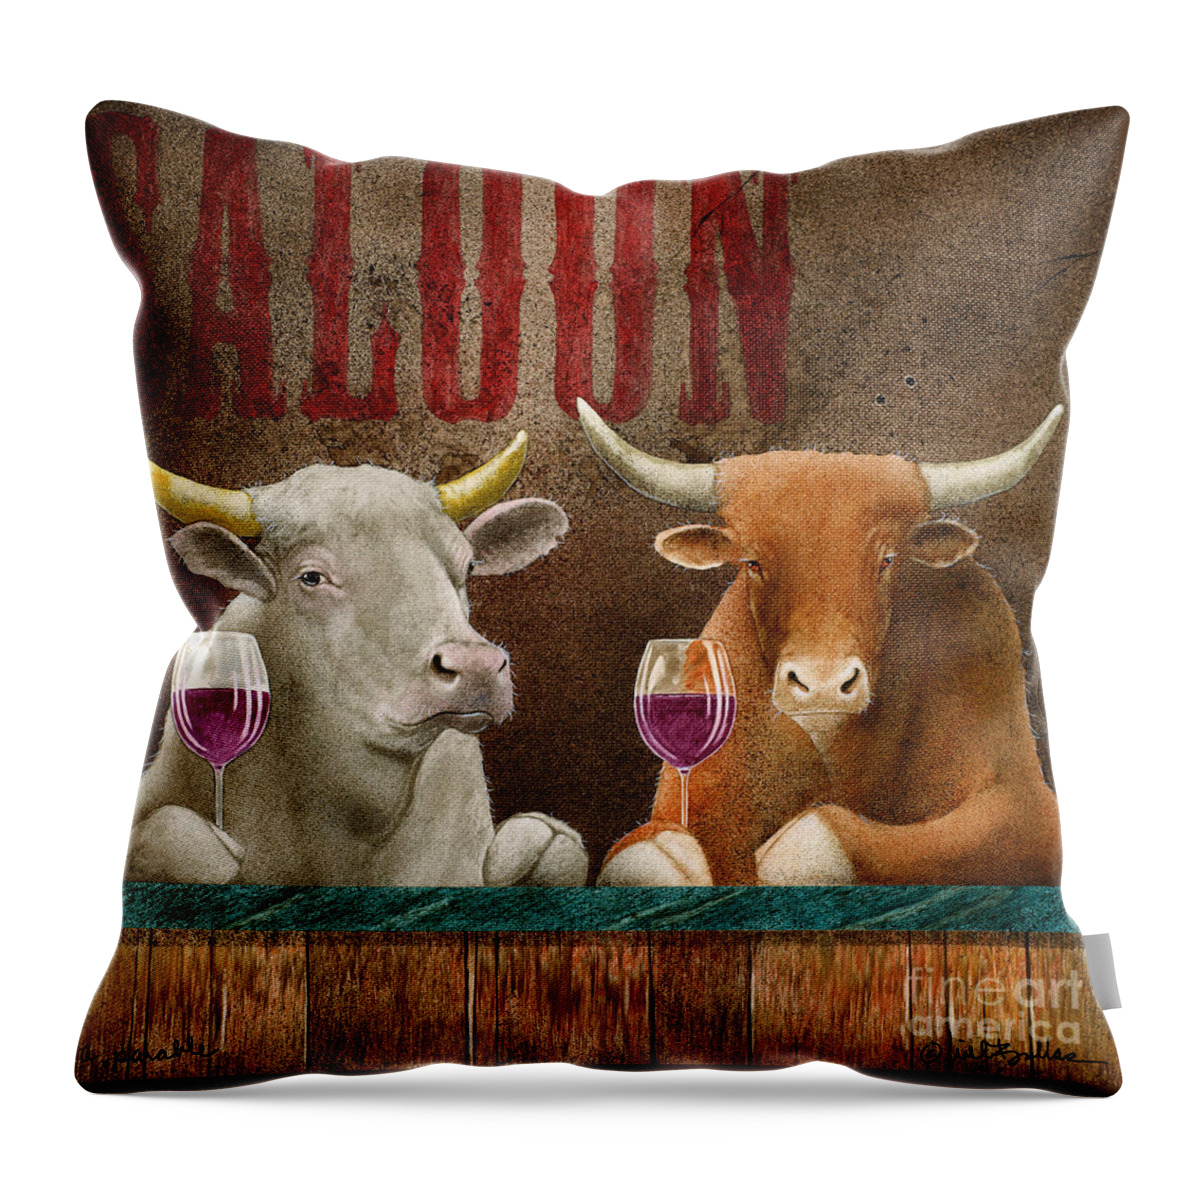 Will Bullas Throw Pillow featuring the painting A Parable... by Will Bullas